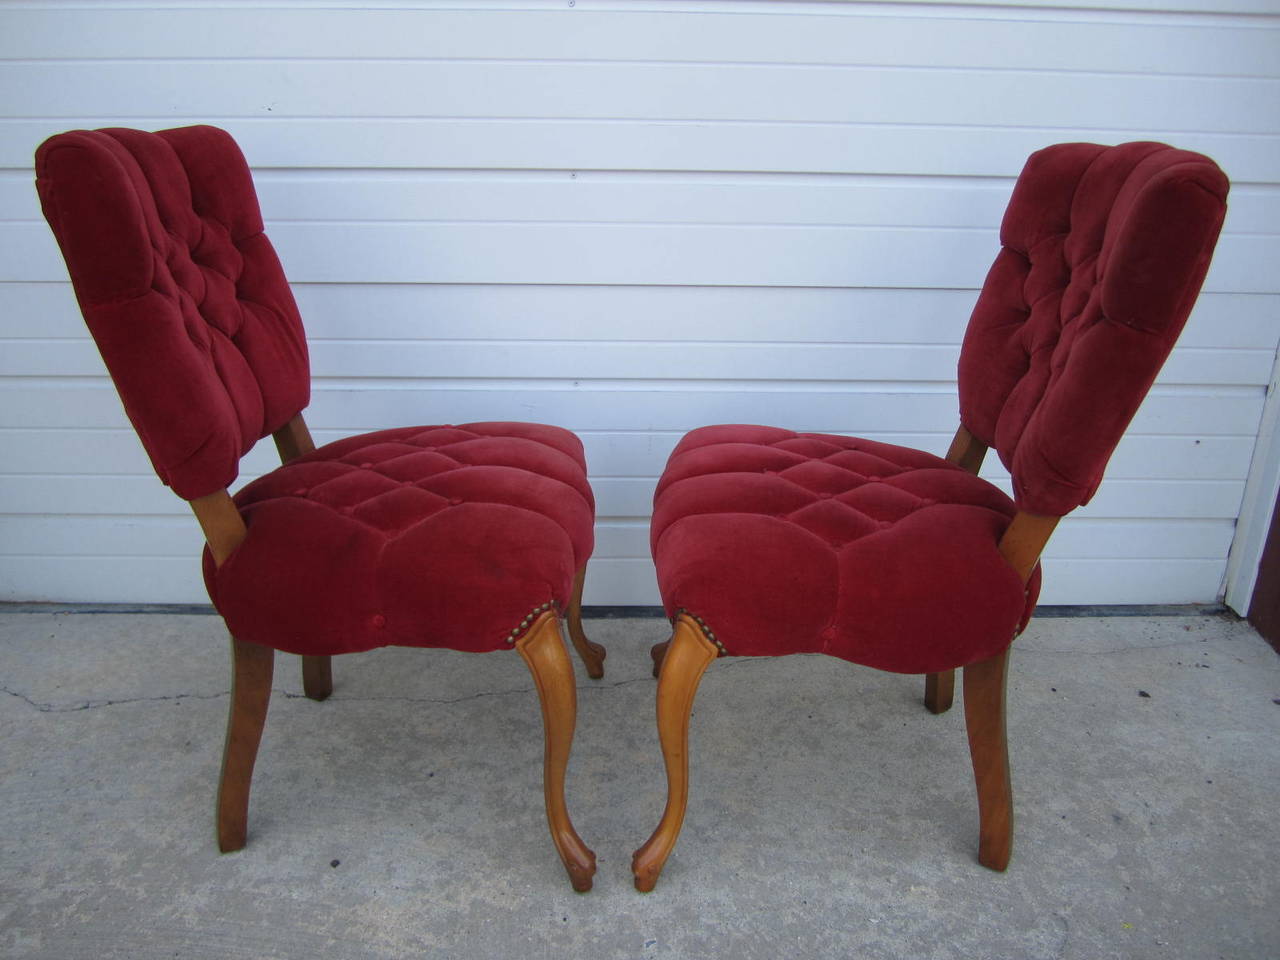 Pretty Pair of Queen Anne Style Red Tufted Side Chairs Hollywood Regency In Good Condition For Sale In Pemberton, NJ